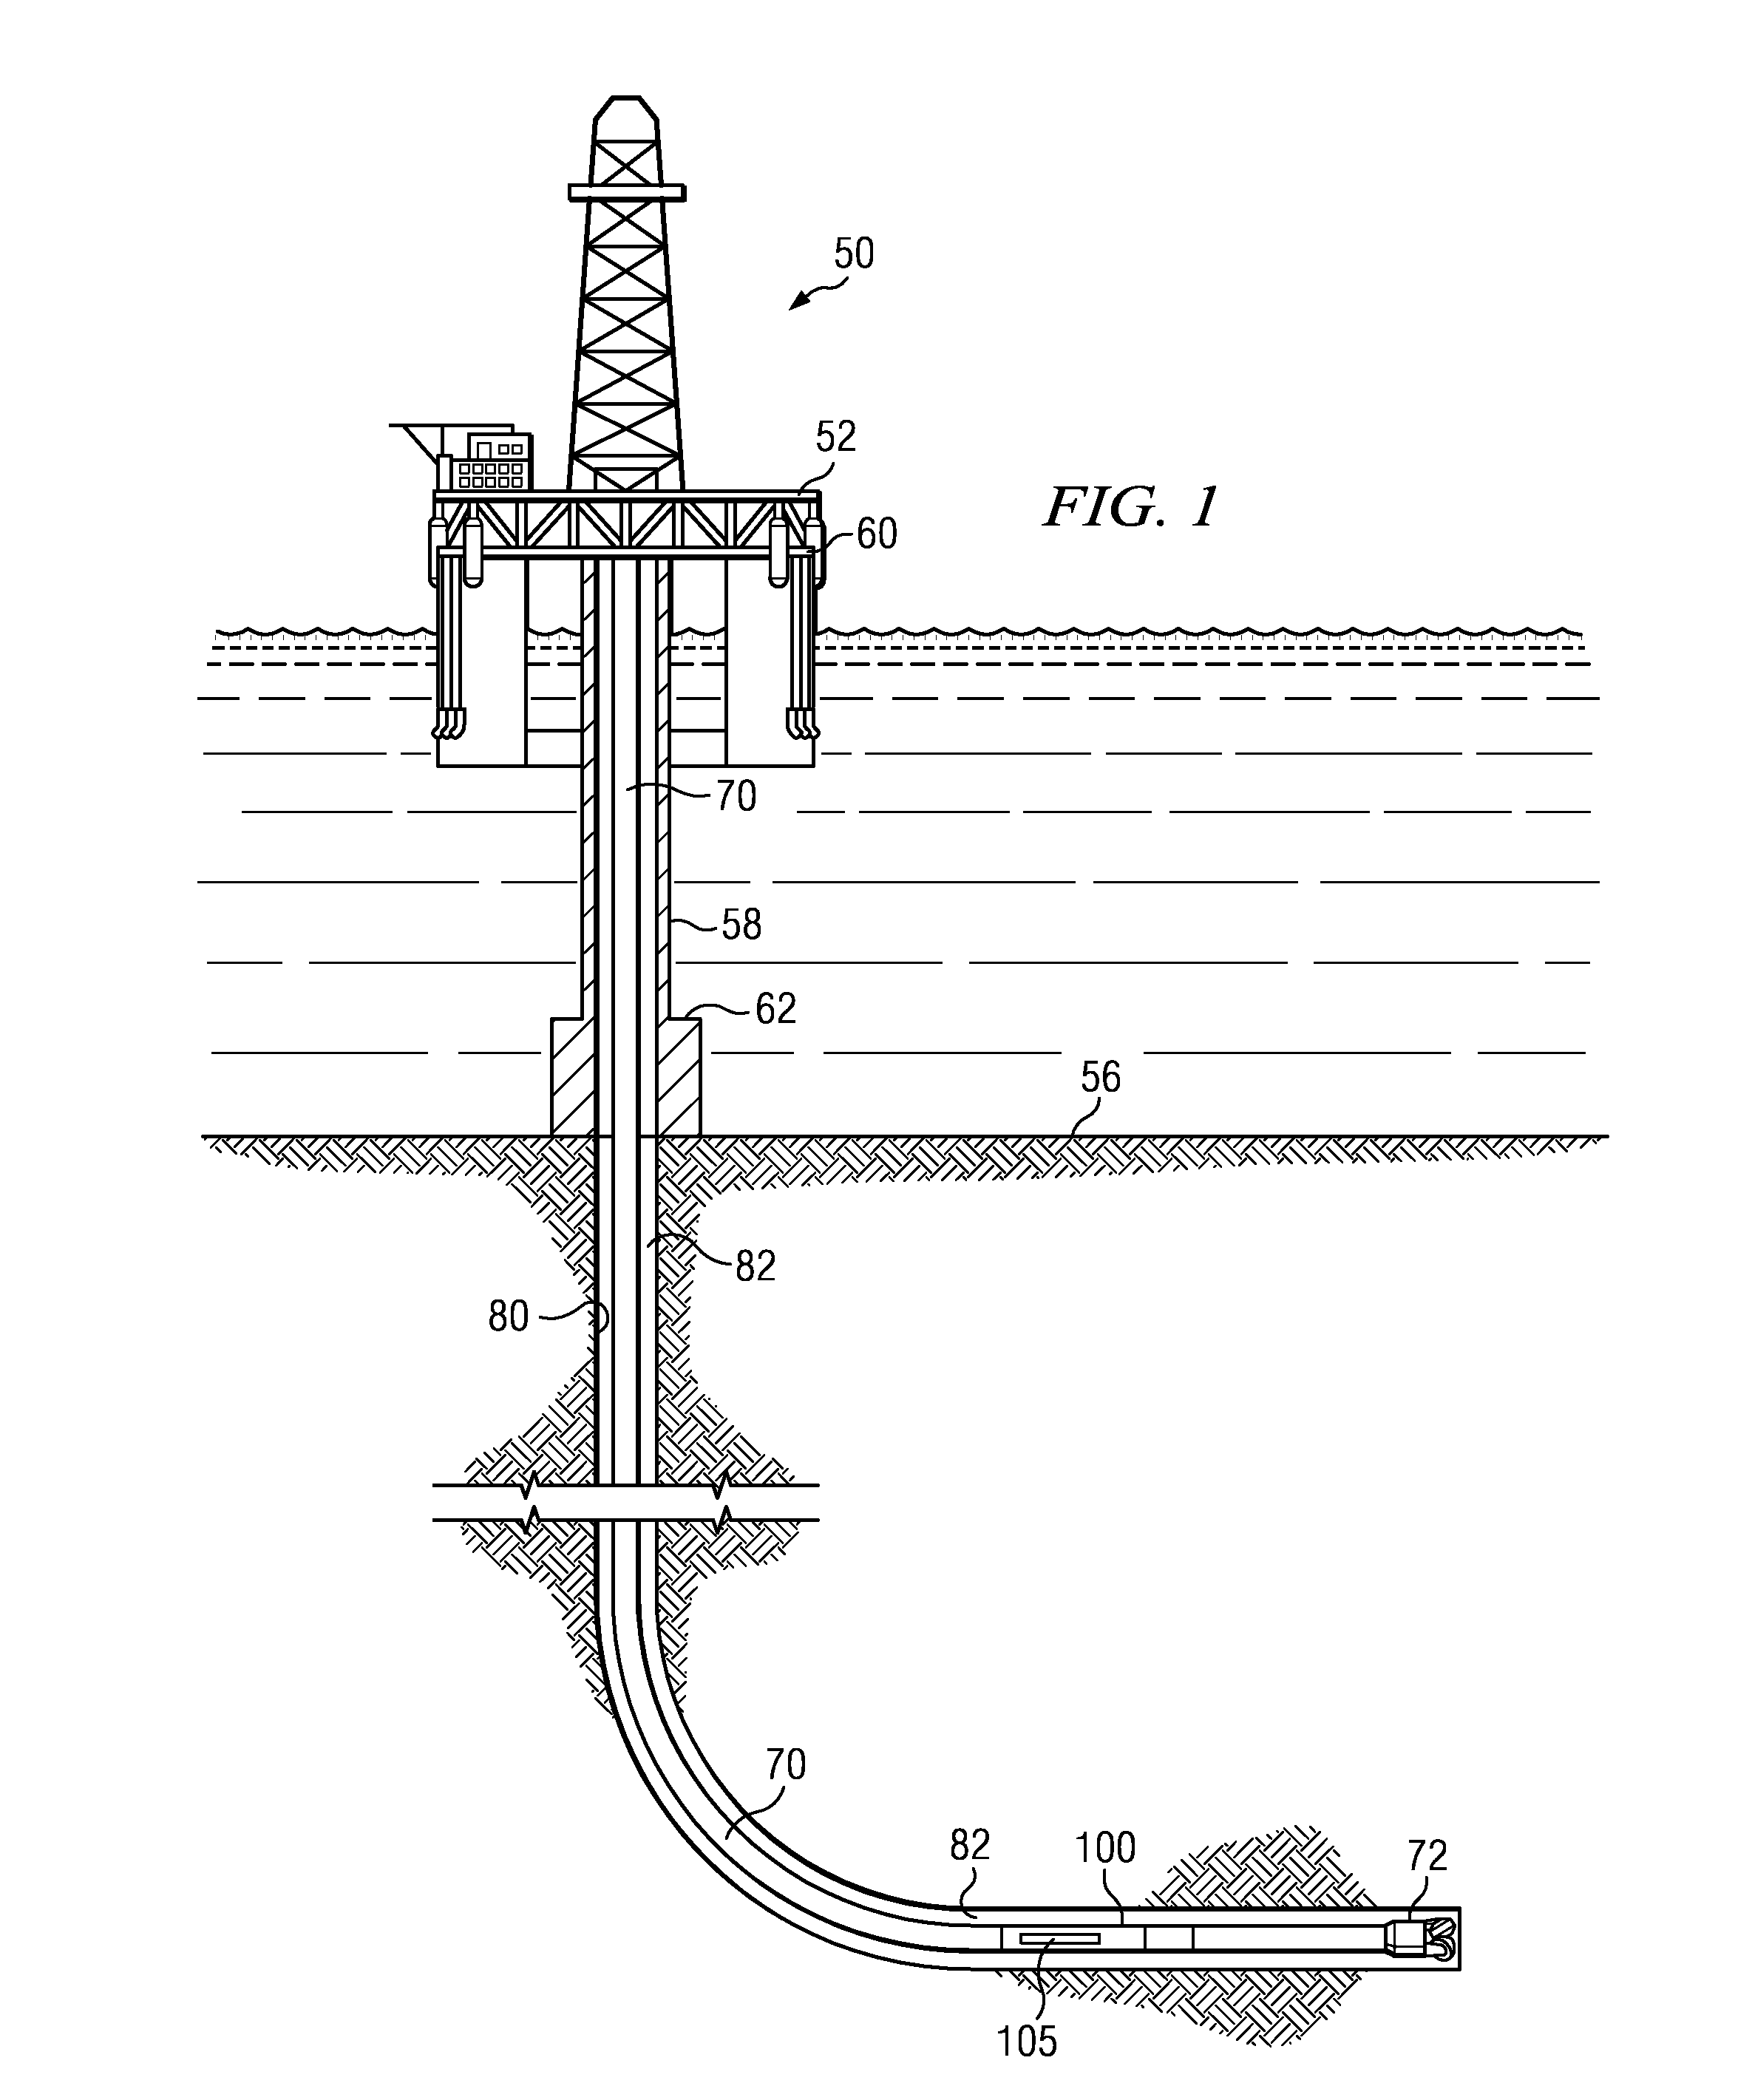 Hydraulic actuation of a downhole tool assembly